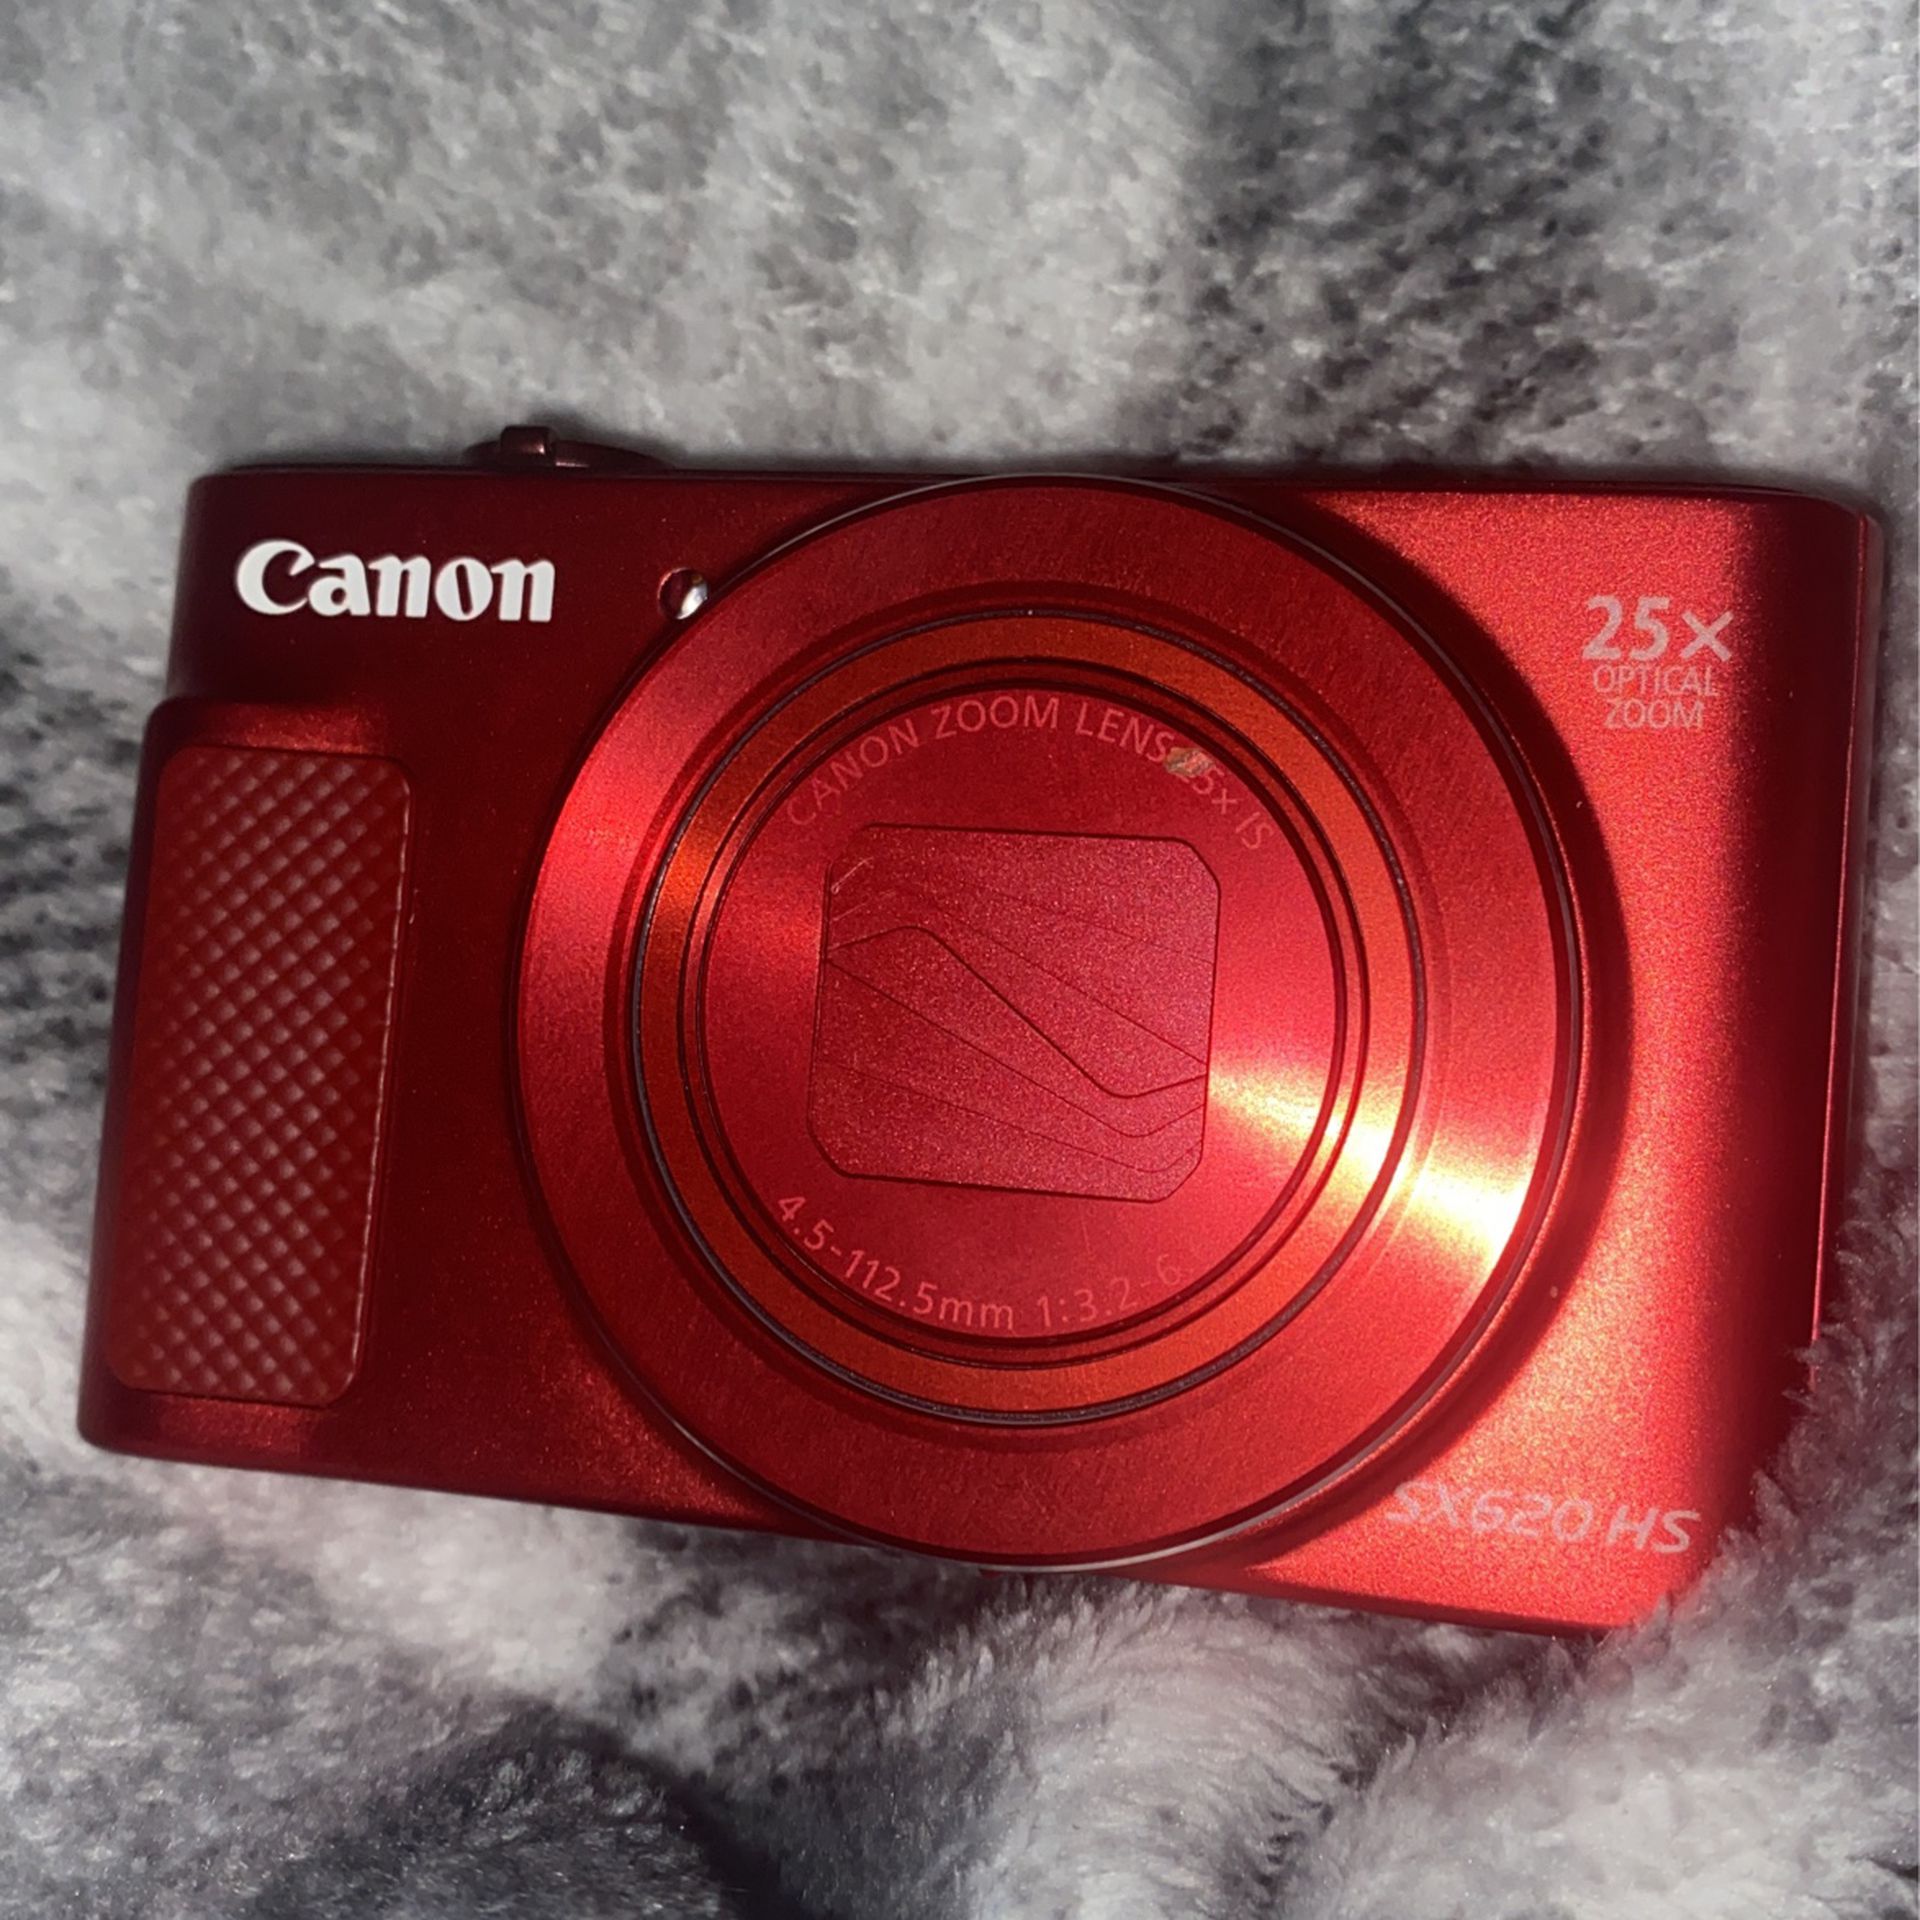 Canon PowerShot SX620 HS Digital Camera (Red) for Sale in